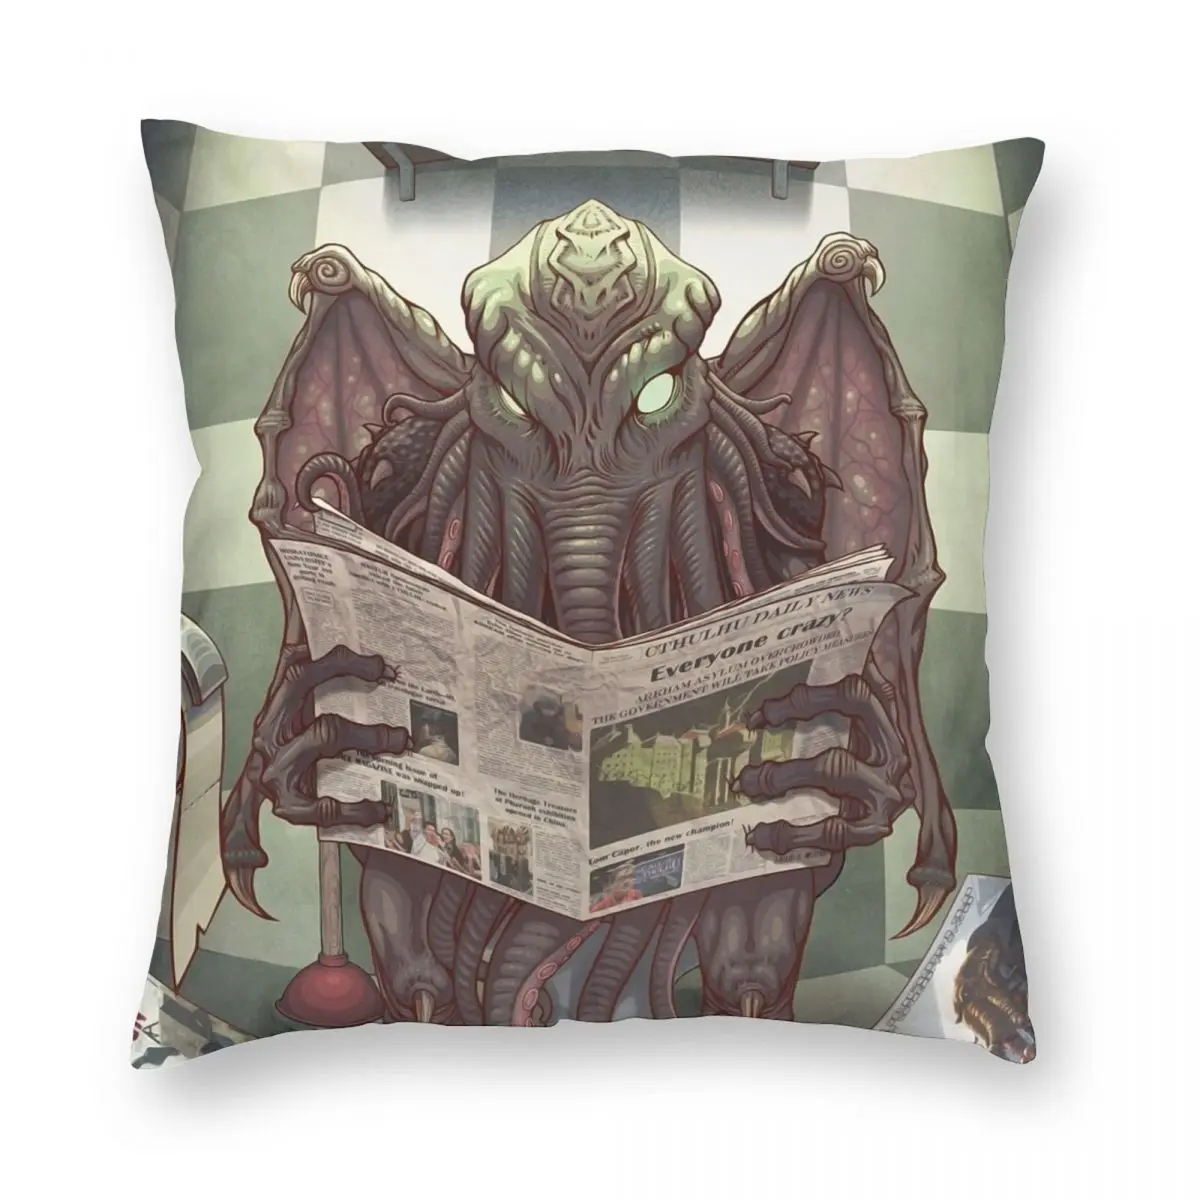 

Funny Cthulhu Poop Pillowcase Printed Polyester Cushion Cover Decoration Lovecraft Monster Pillow Case Cover Seat Square 18''